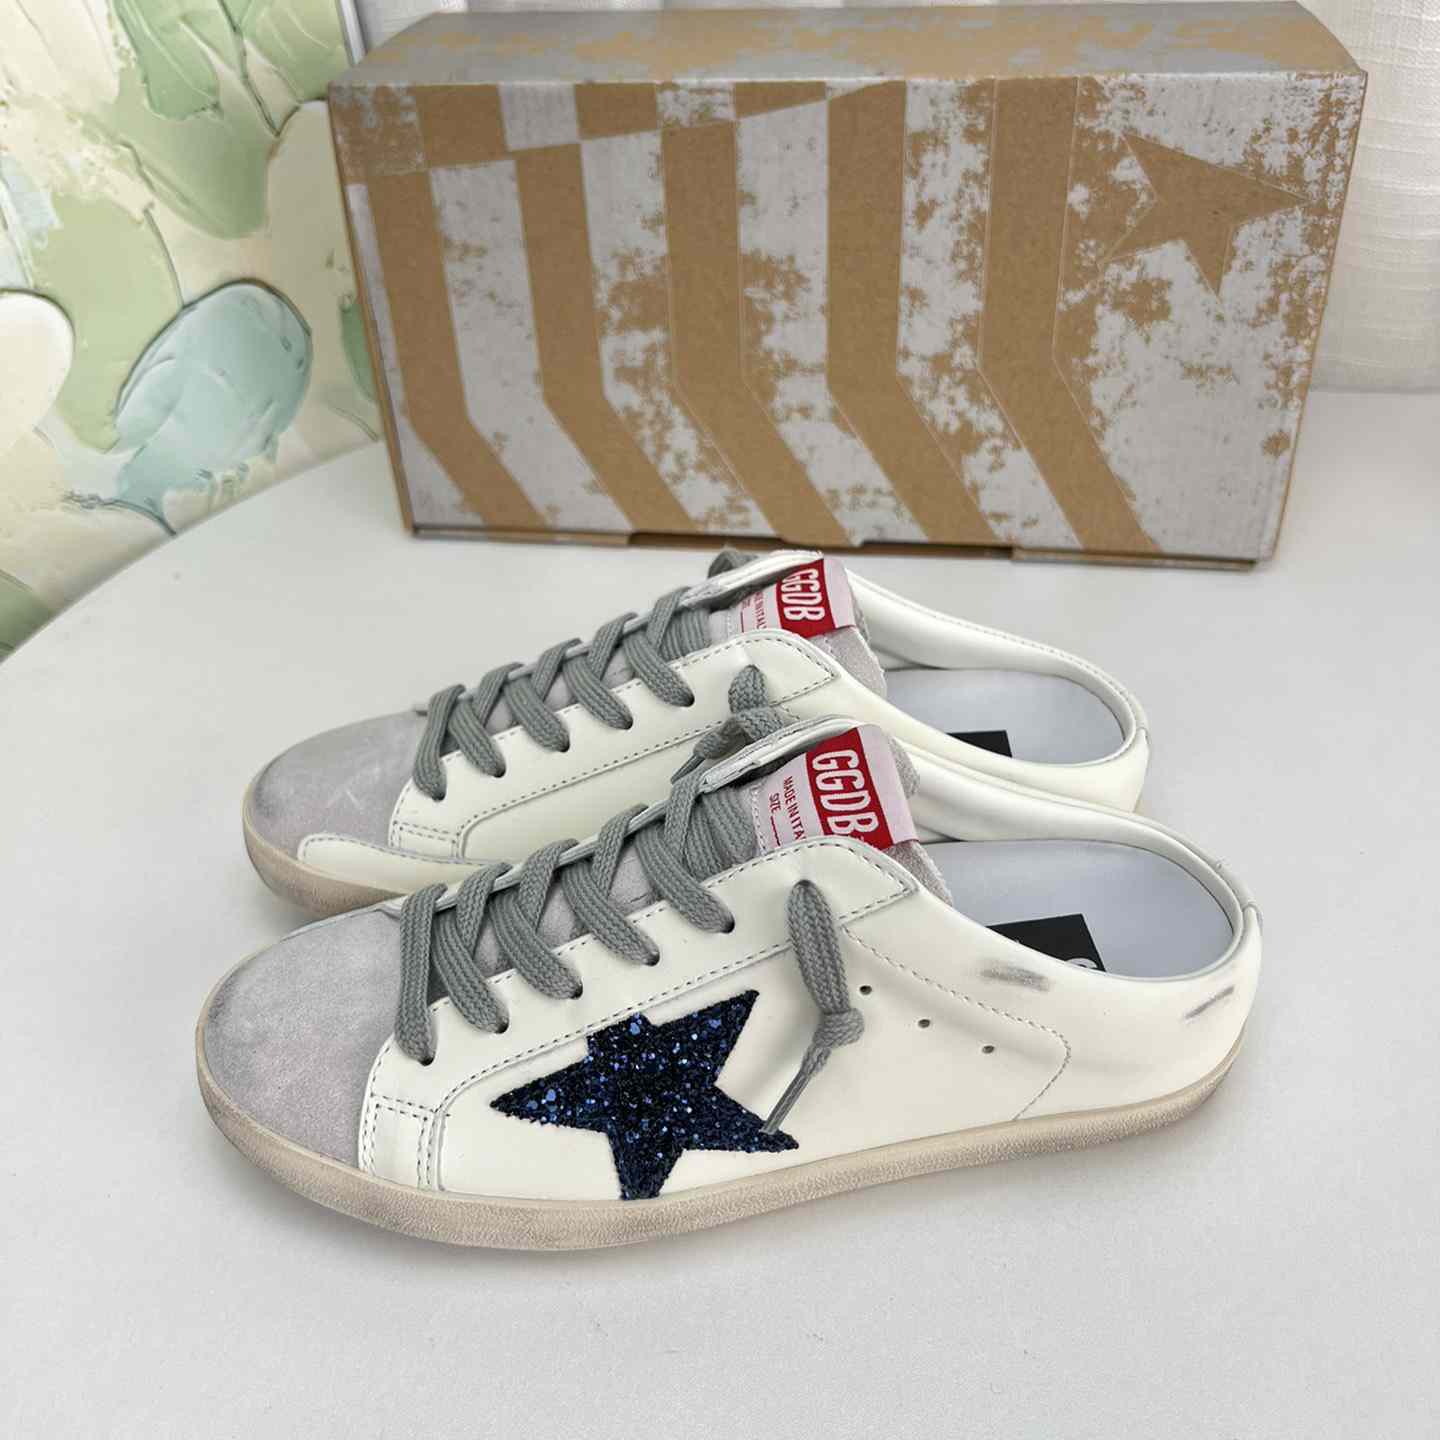 Golden Goose Super-Star Sabots In White Leather With Blue Glitter Star And Dove-Gray Suede Tongue - DesignerGu